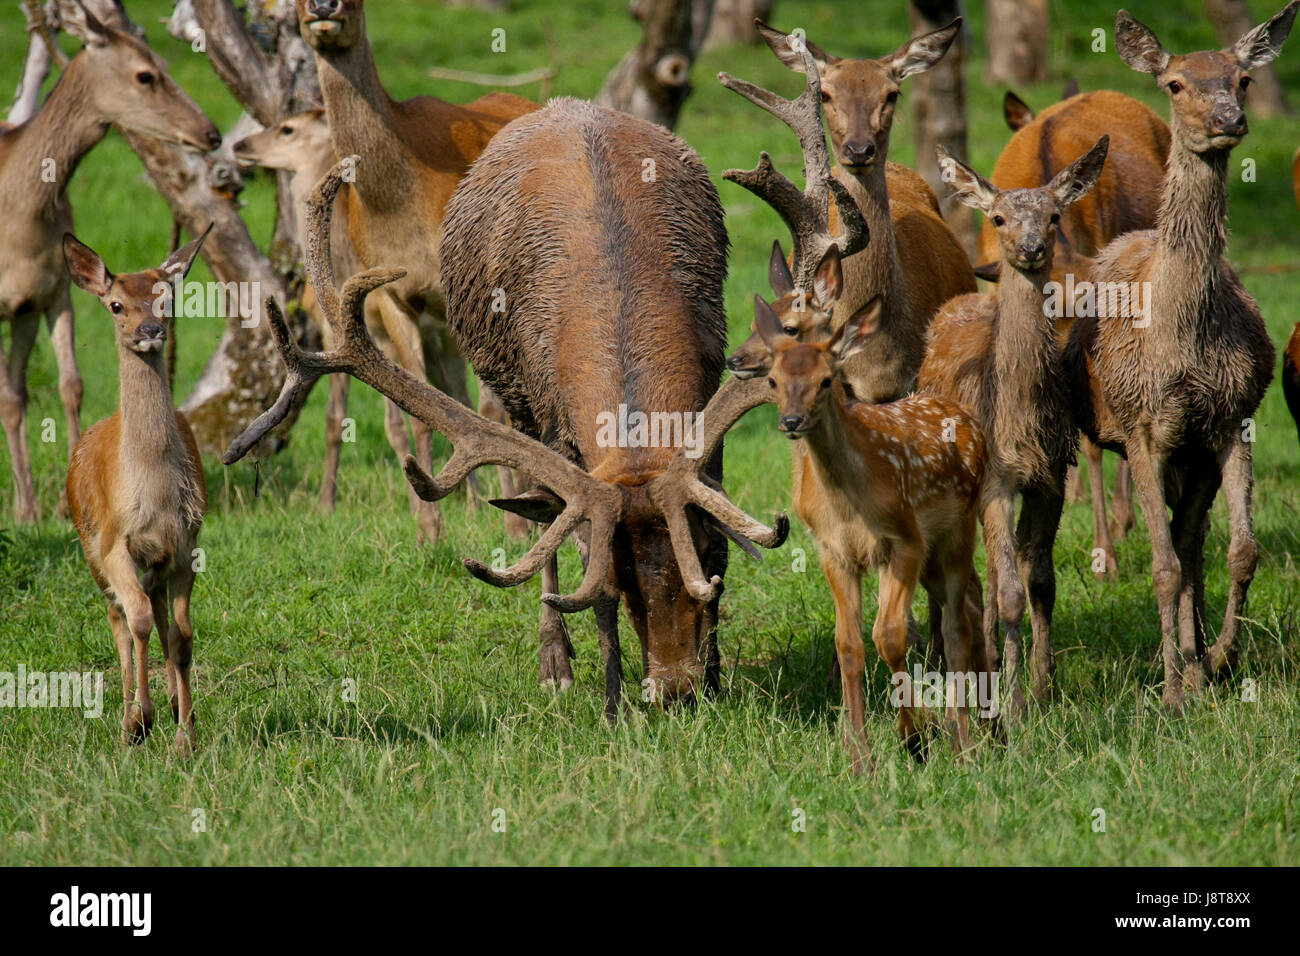 animal, wild, horns, deer, deer stag, hunting, chase, nature, hart, stag, Stock Photo